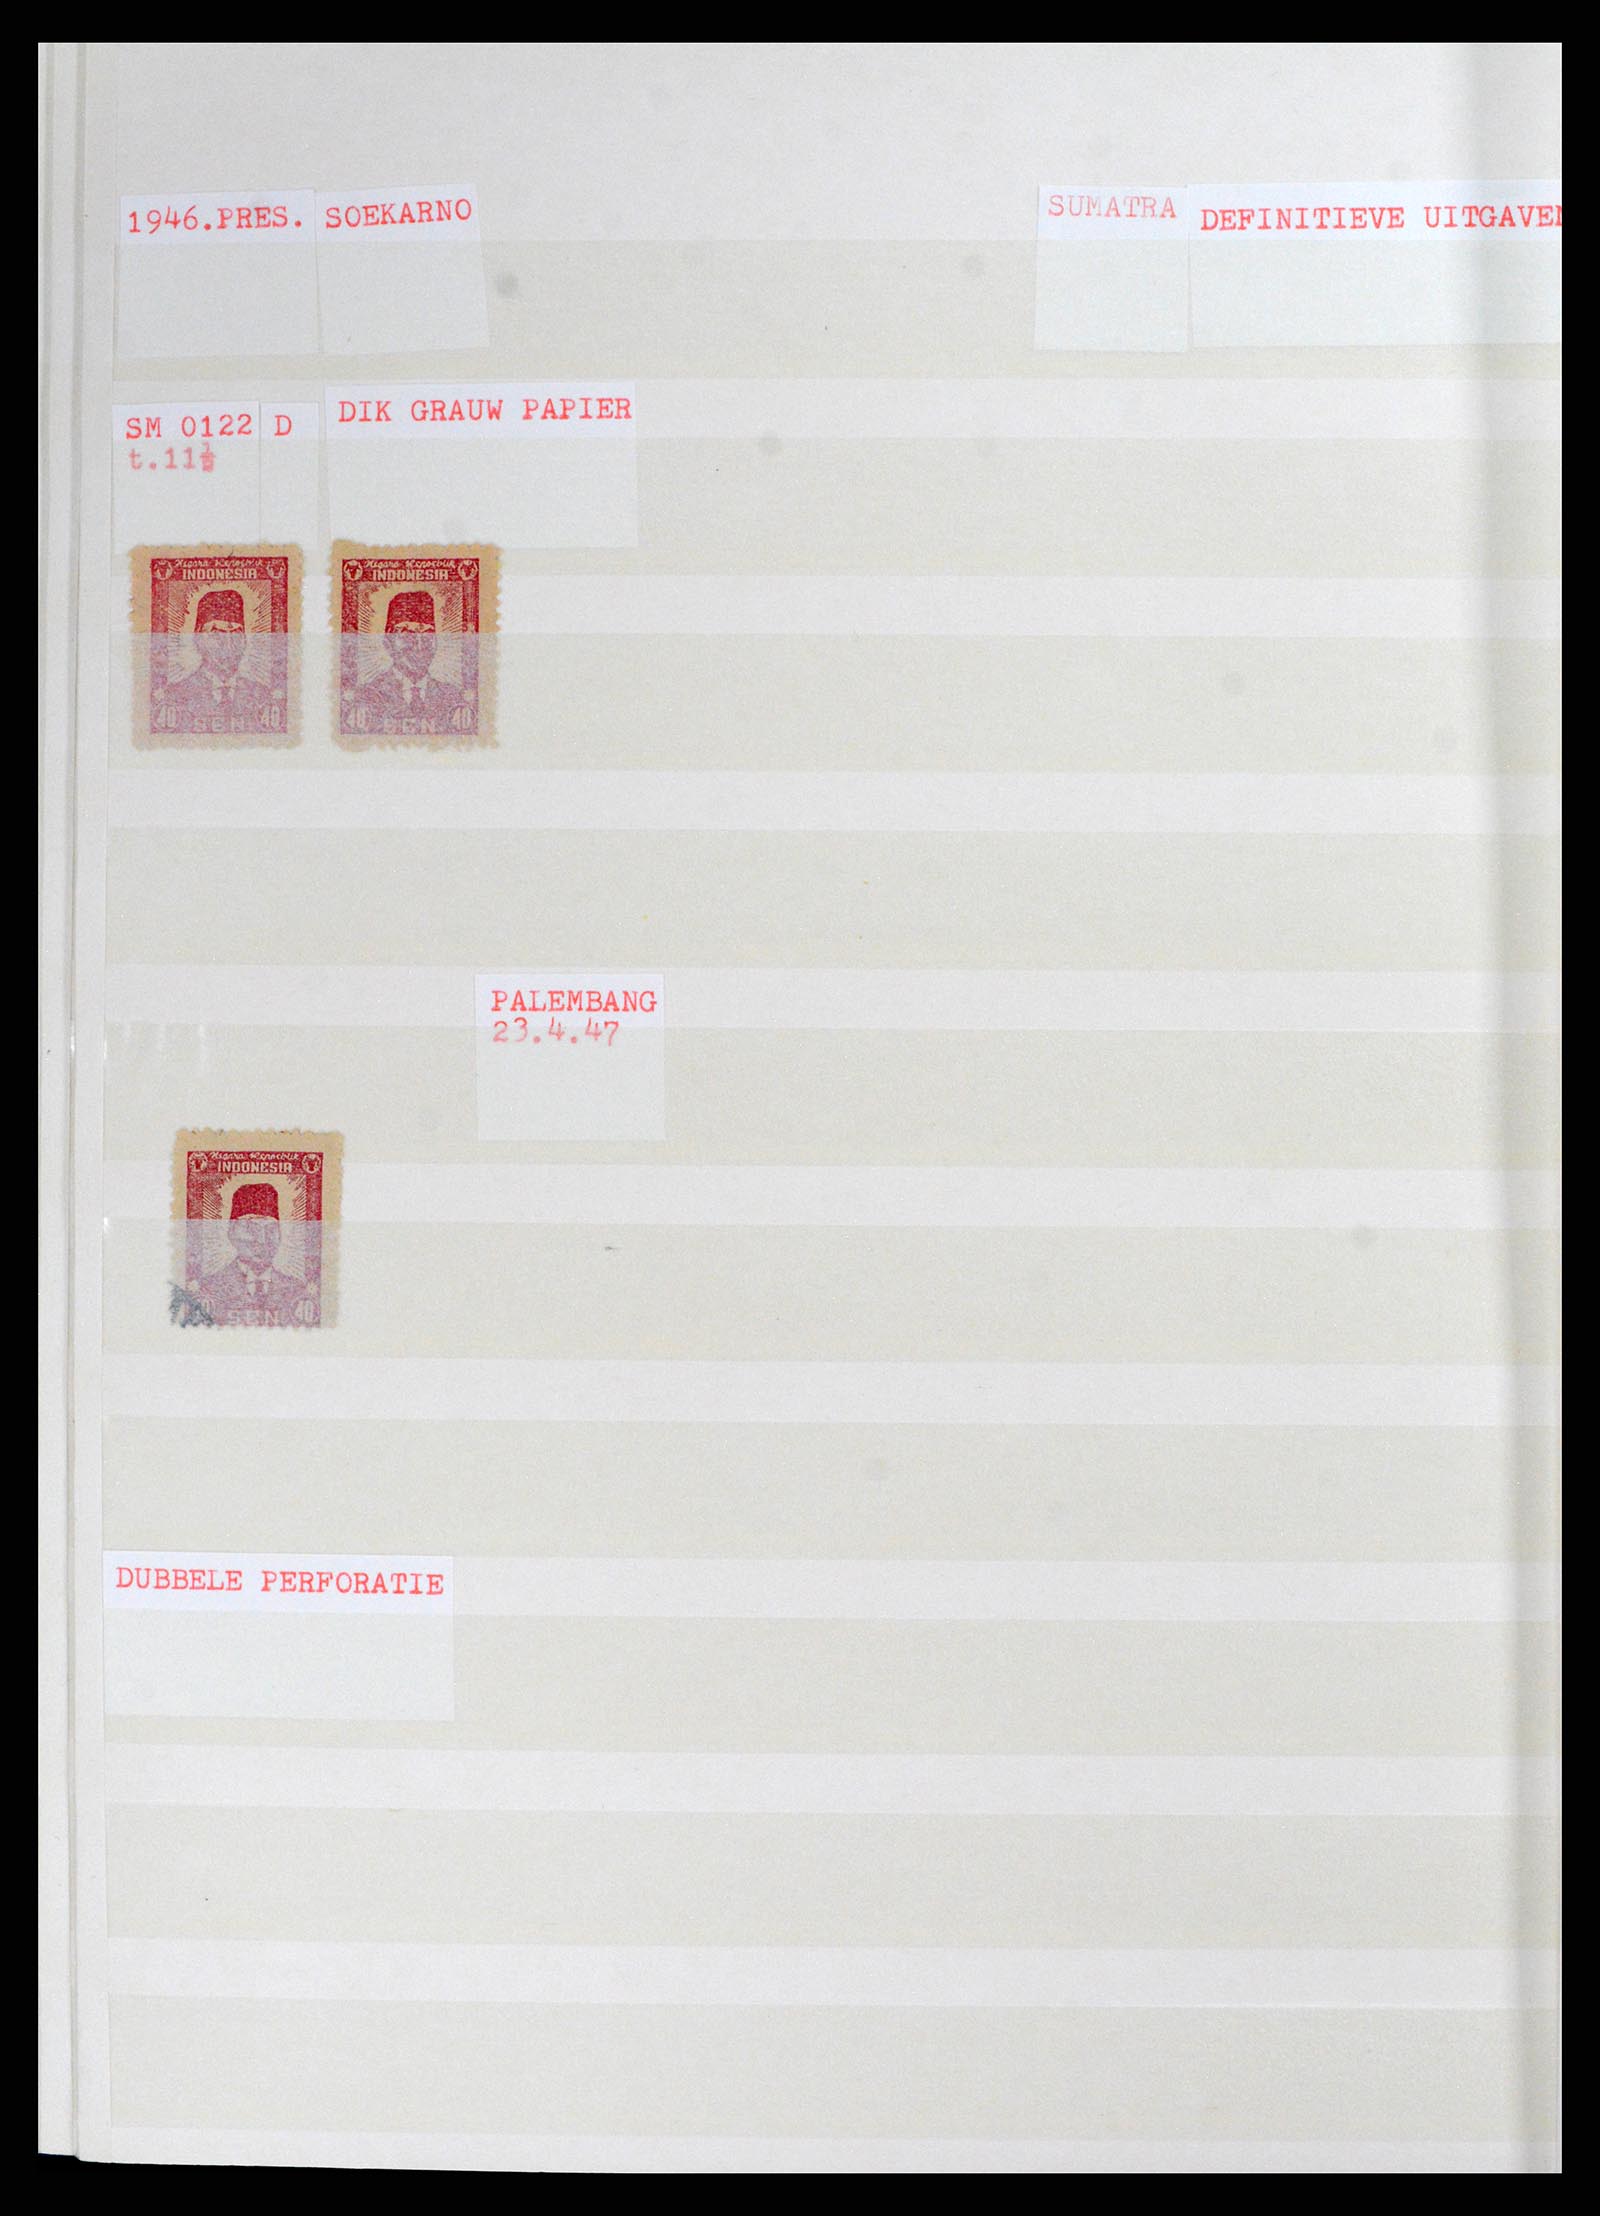 37692 098 - Stamp collection 37692 Indonesia interimperiod 1945-1499.